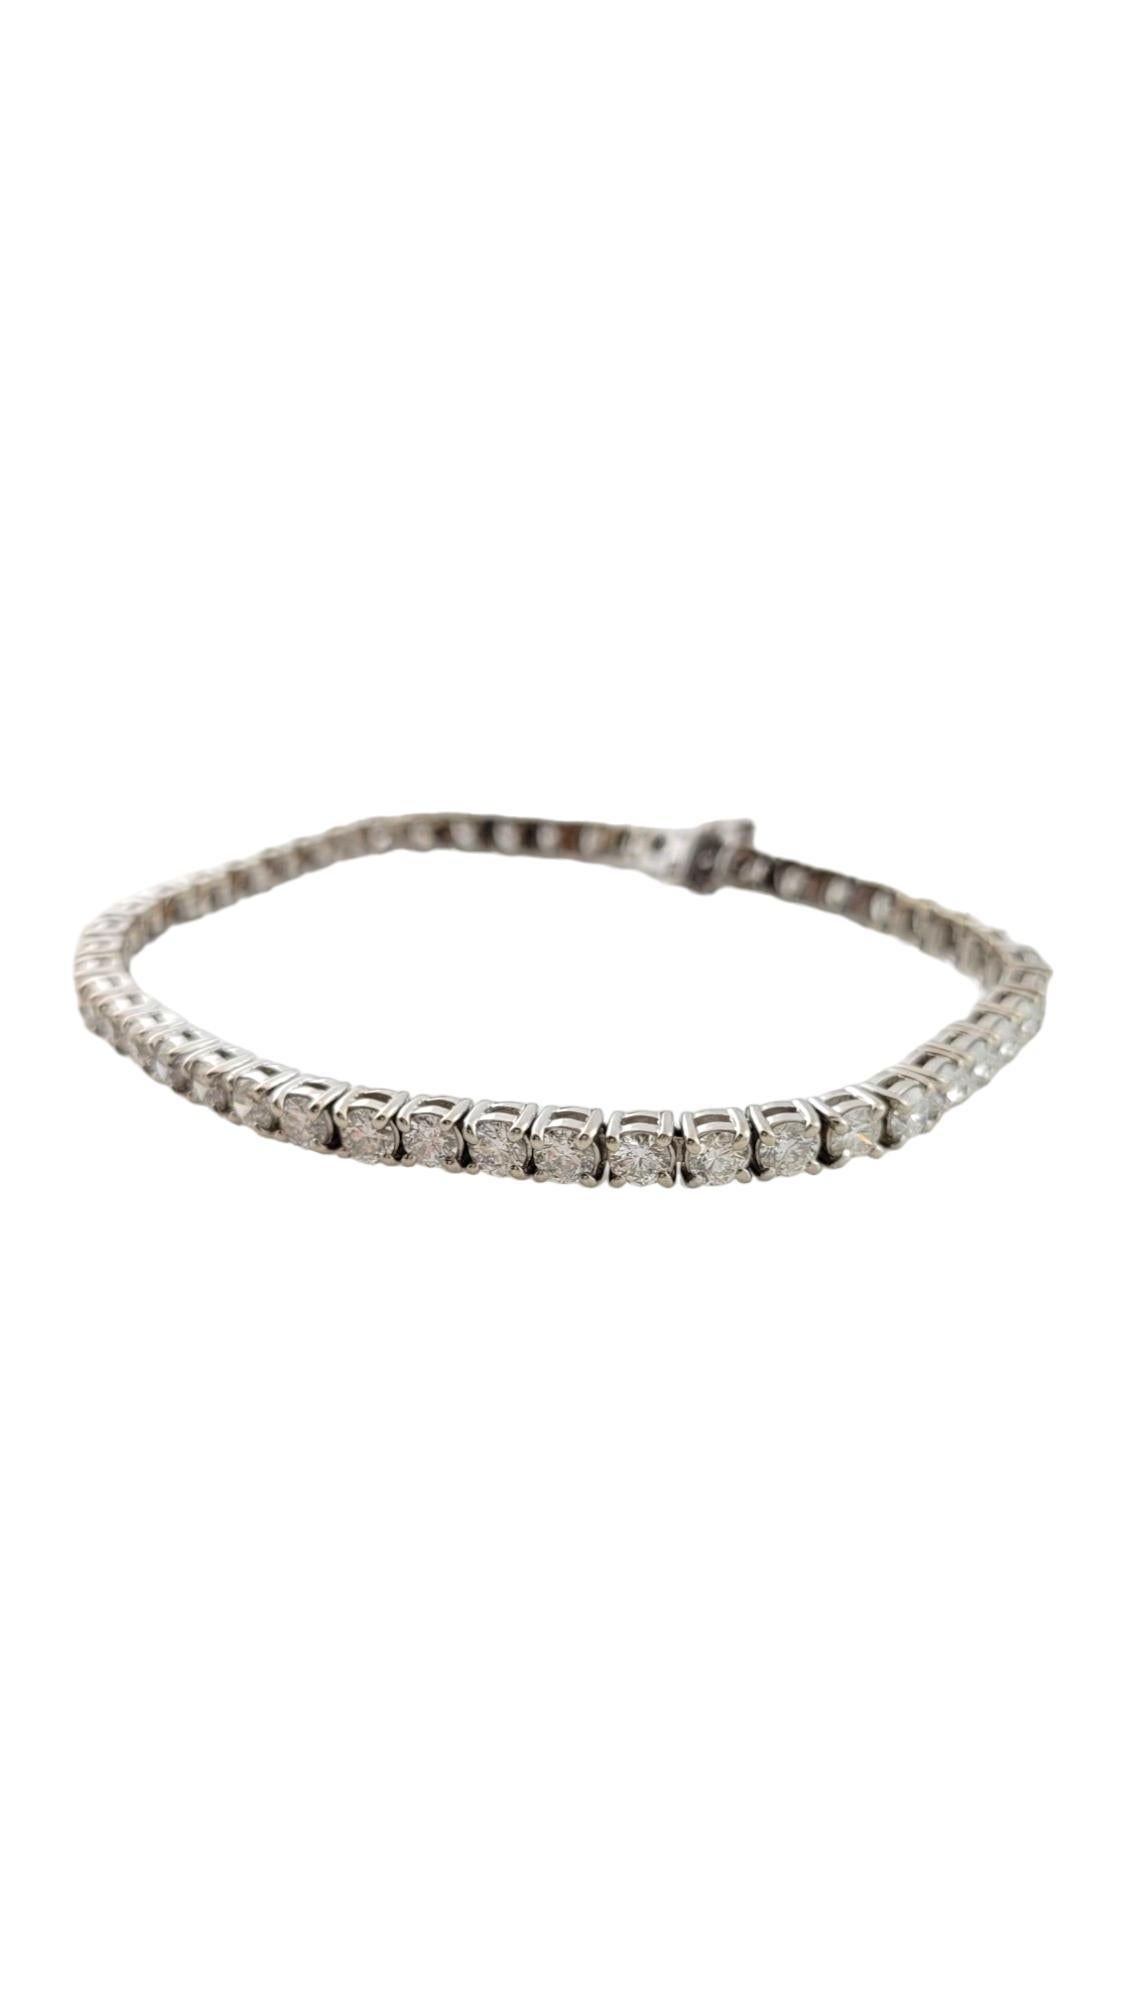 Vintage 14K White Gold Diamond Tennis Bracelet

This diamond tennis bracelet will sparkle across the room from your wrist!

The bracelet is set with 48 diamonds at approx. .15 pts each for a total of approx. 7.2 carats.

Diamonds are round